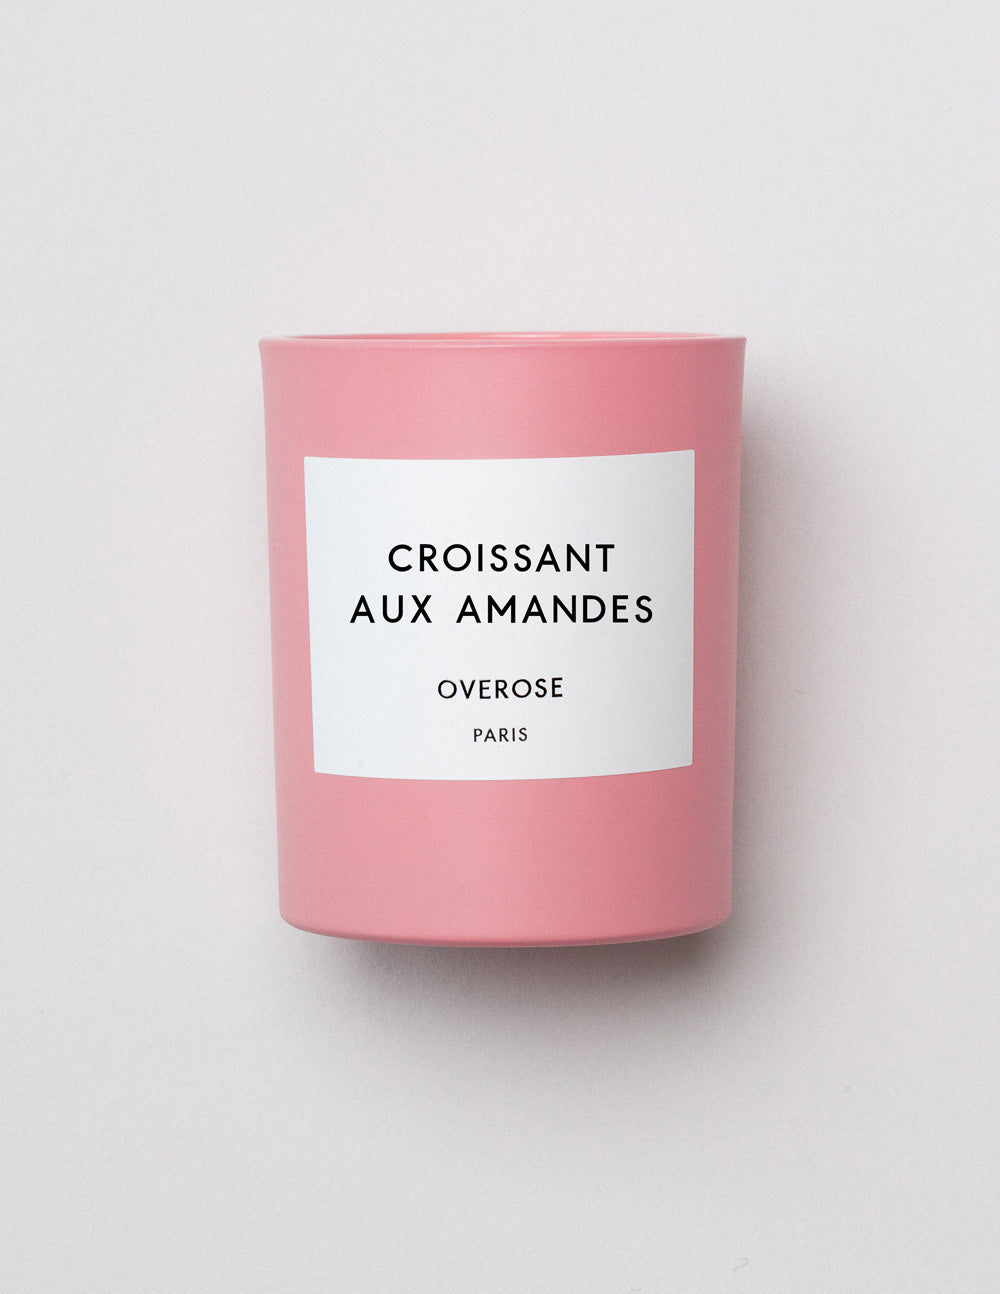 OVEROSE Almond Croissant Scented Candle, 240g